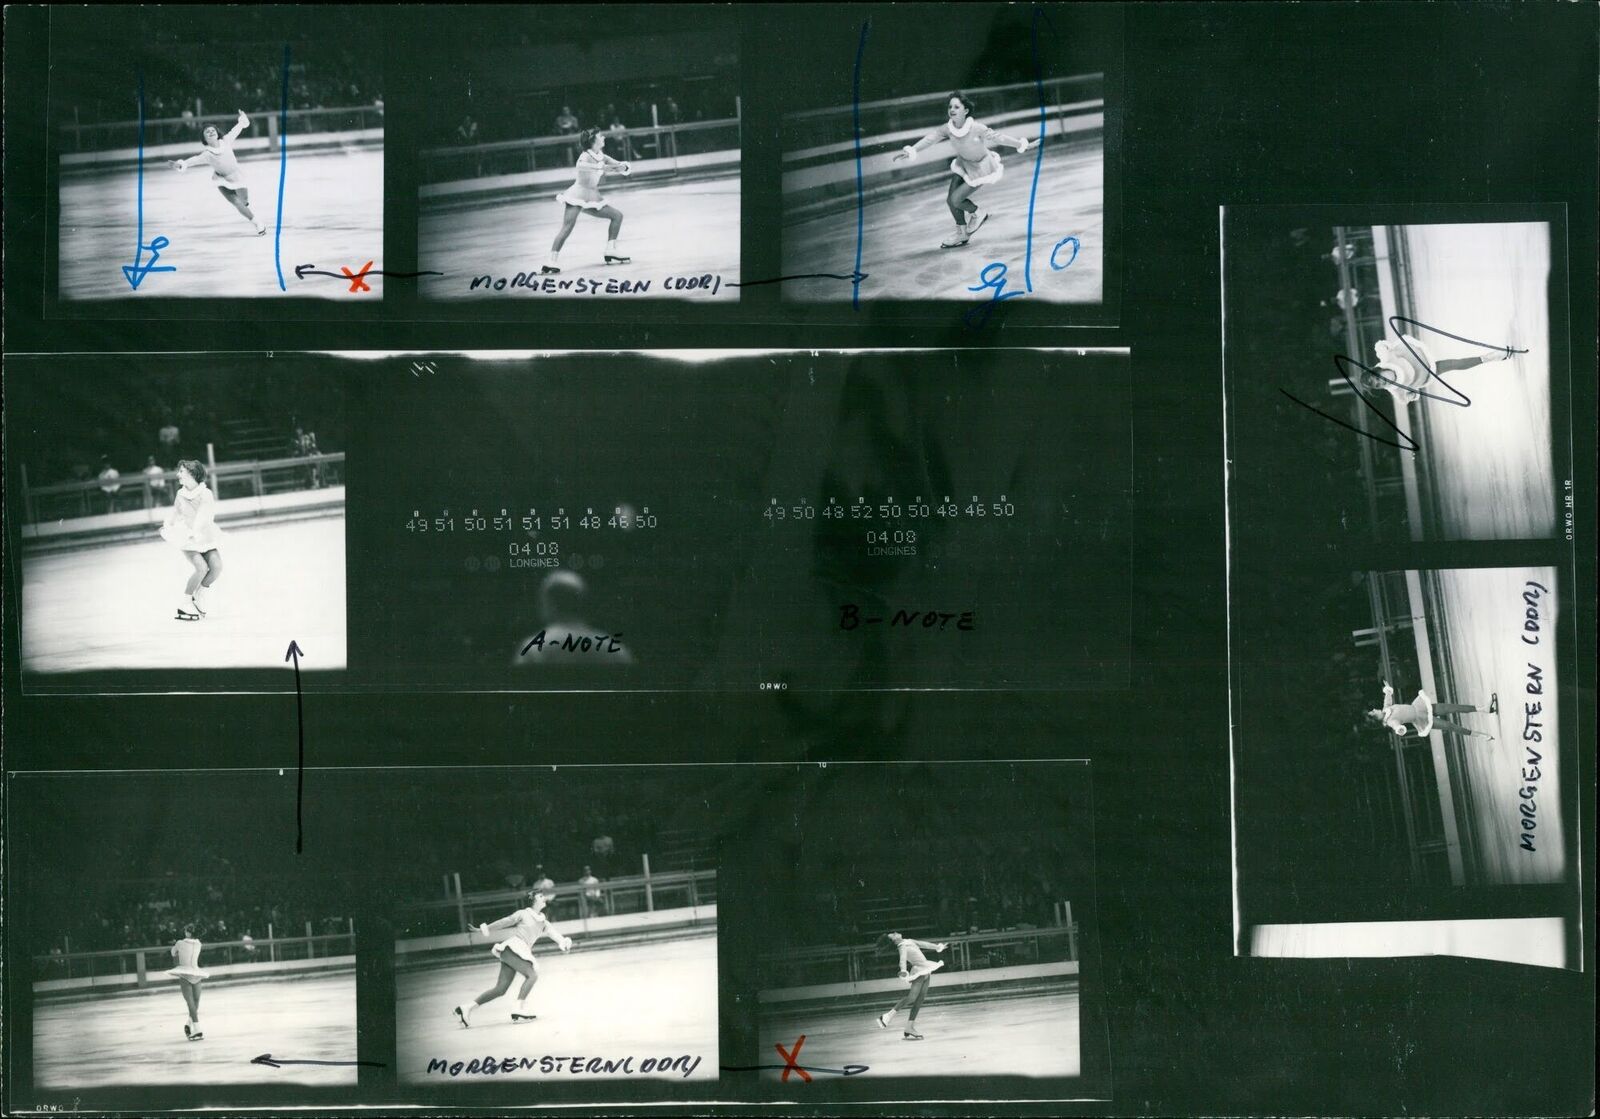 Contact sheet for the 1968 Winter Olympics - Vintage Photograph 3761788